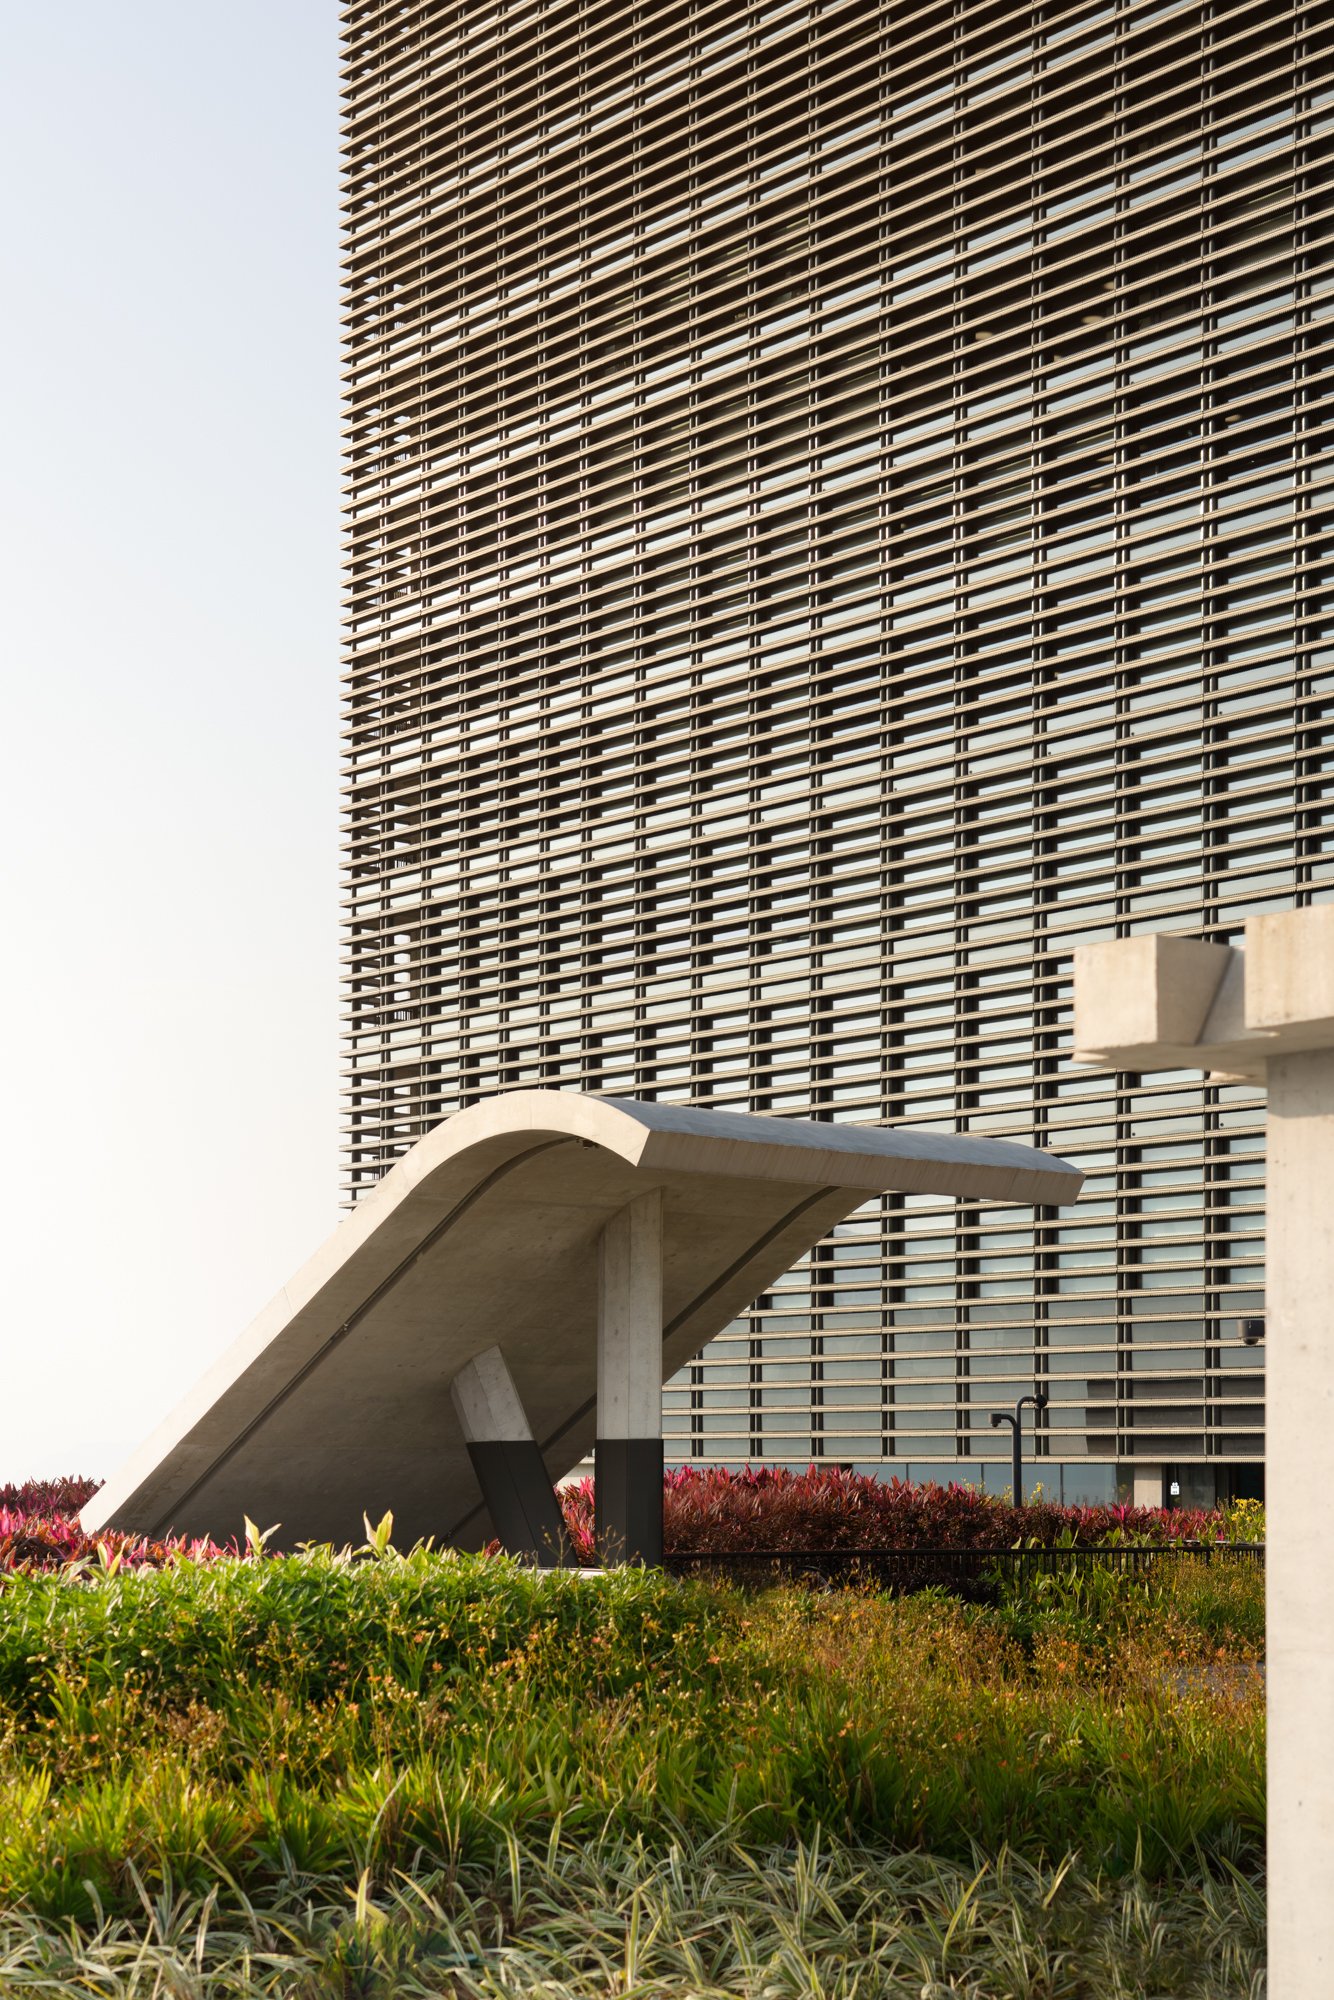  M+ Hong Kong  Designed by / Photographed for Farrells  In cooperation with Herzog &amp; de Meuron 